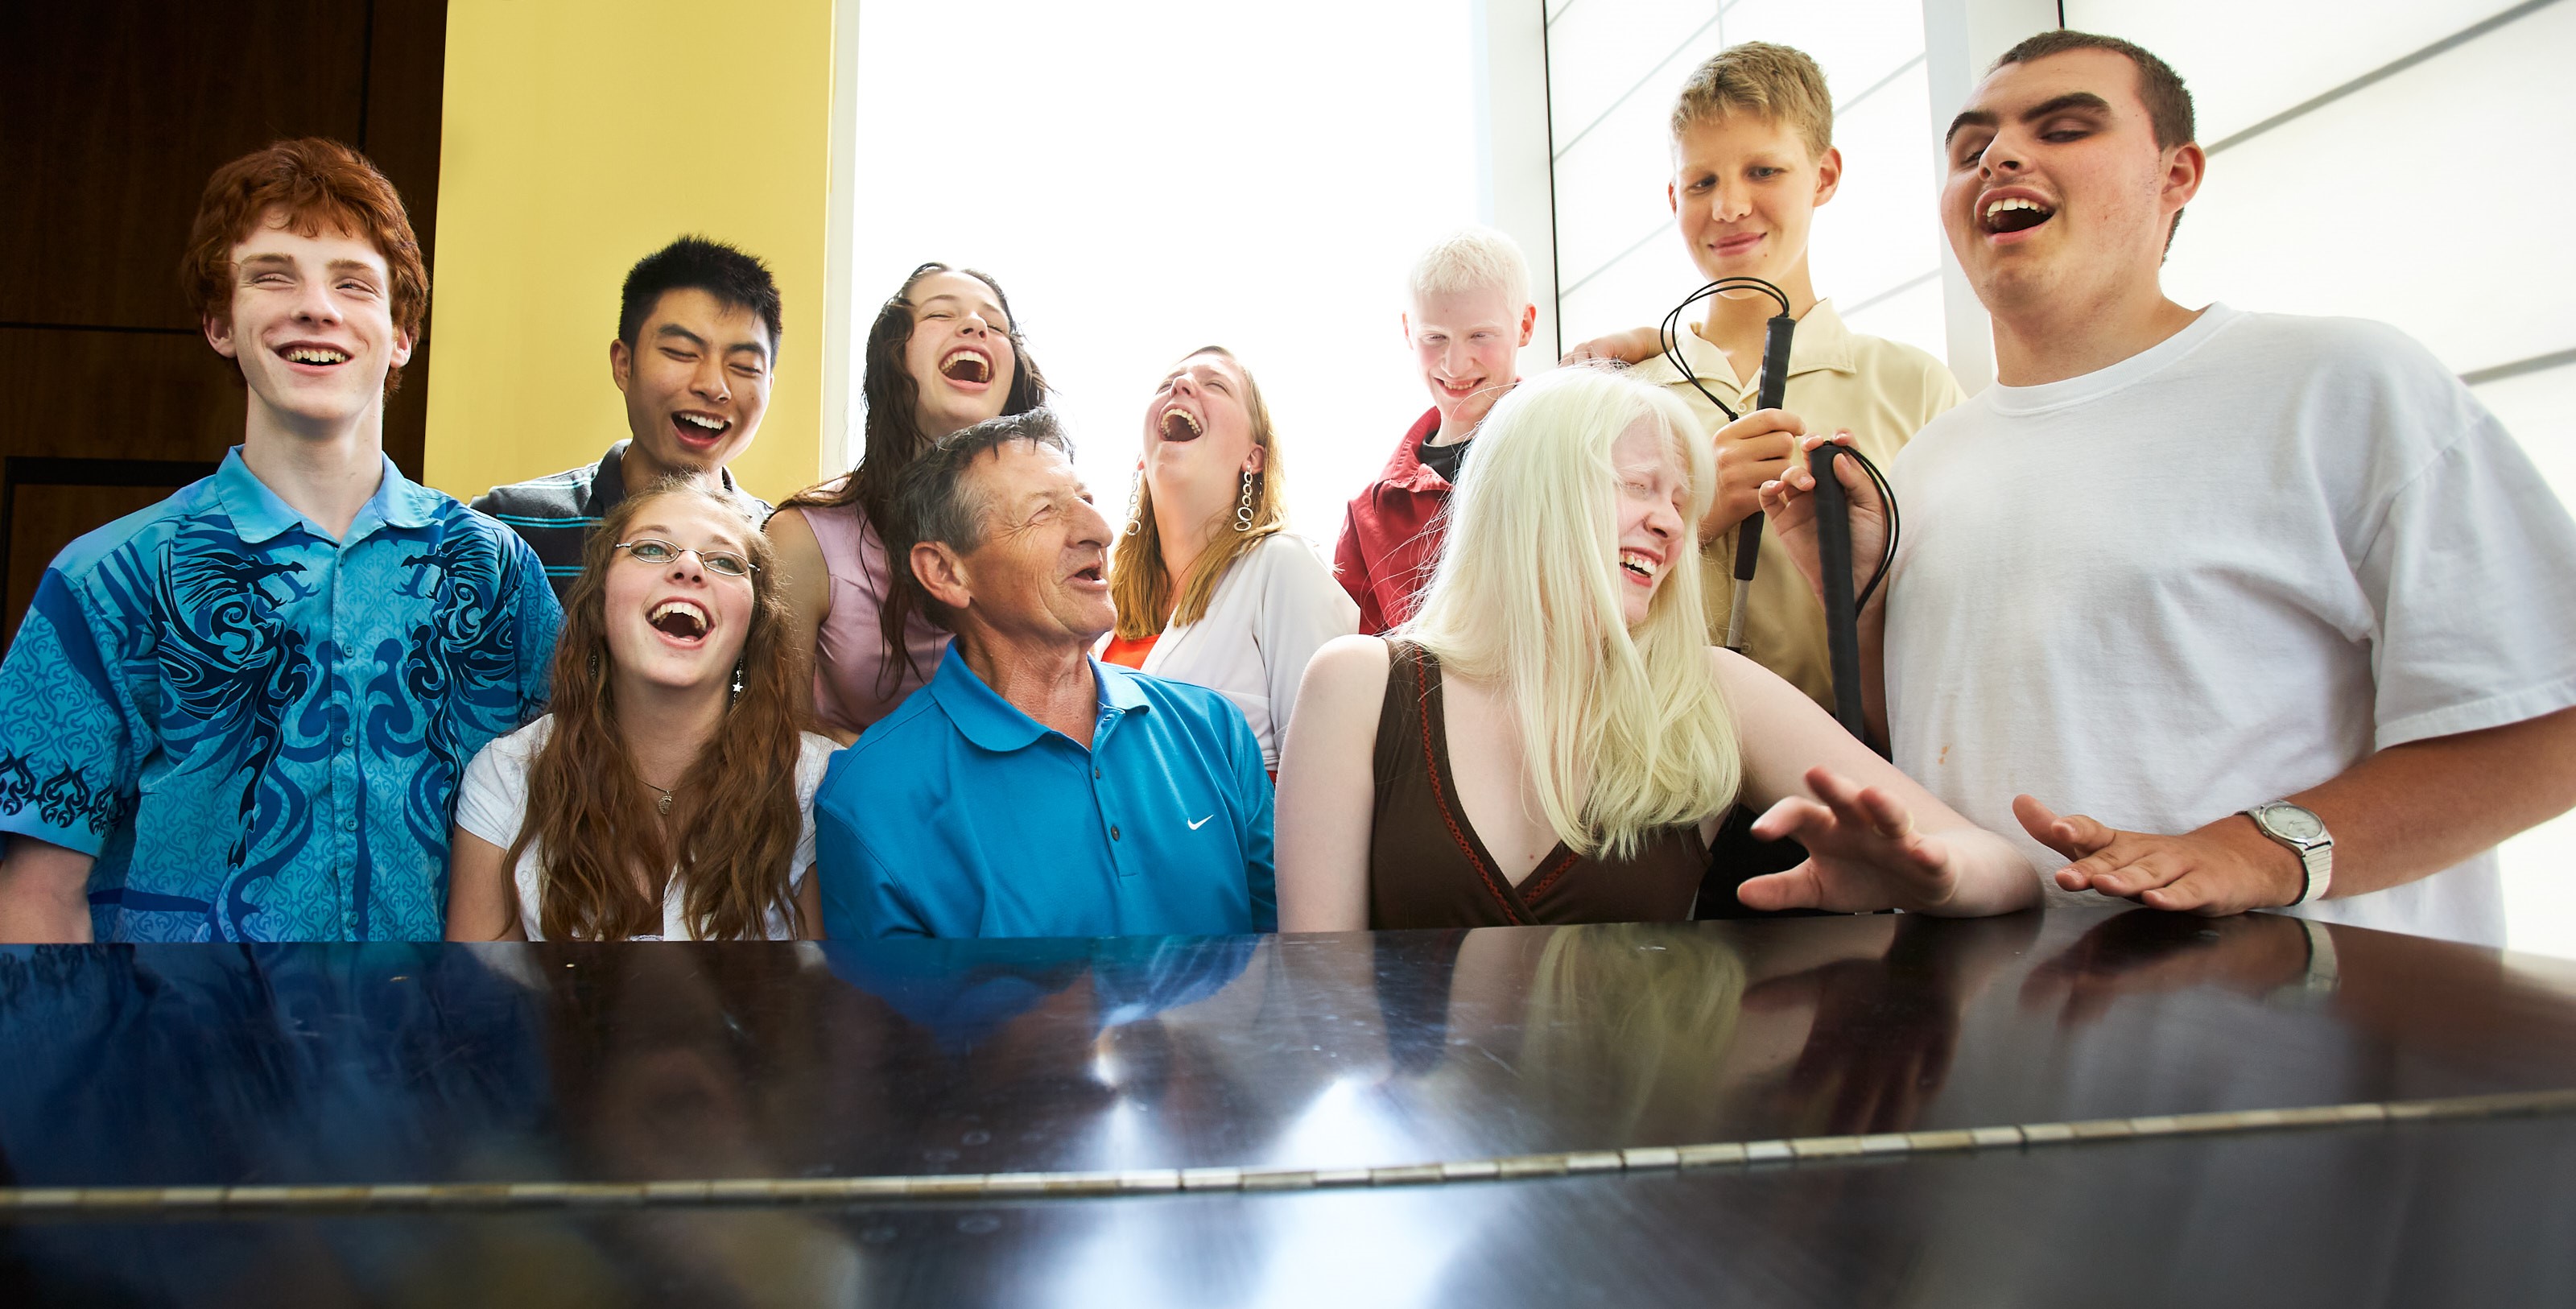 Walter Gretzky sits at a grand piano surrounded by 9 youth with sight loss. They are smiling and excitedly singing a tune while Walter plays the piano.